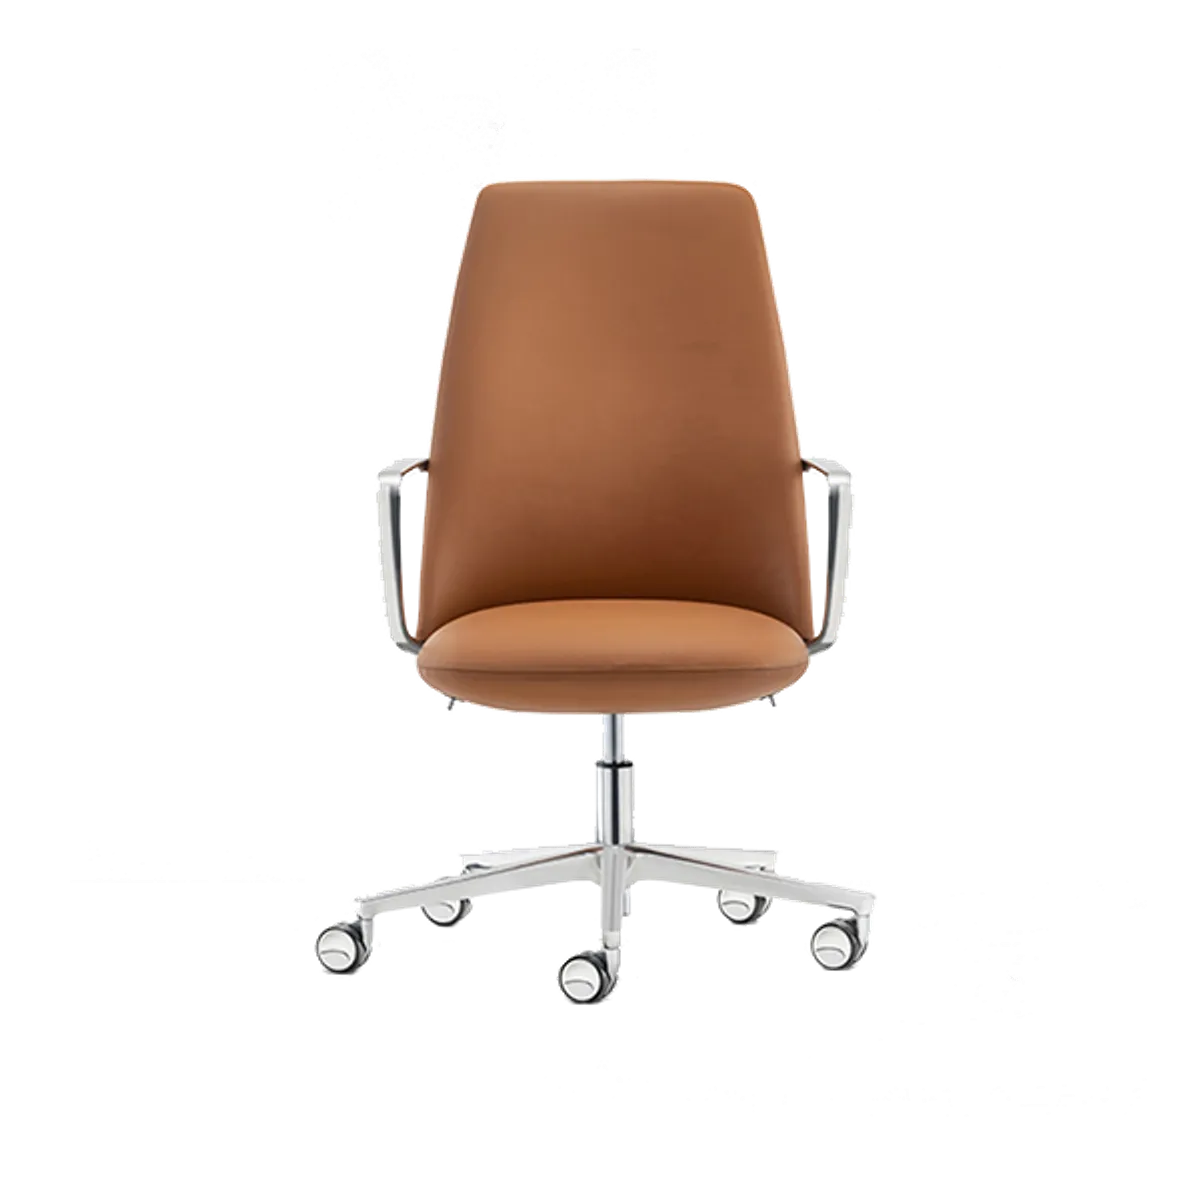 Elinor Executive Office Chair Inside Out Contracts